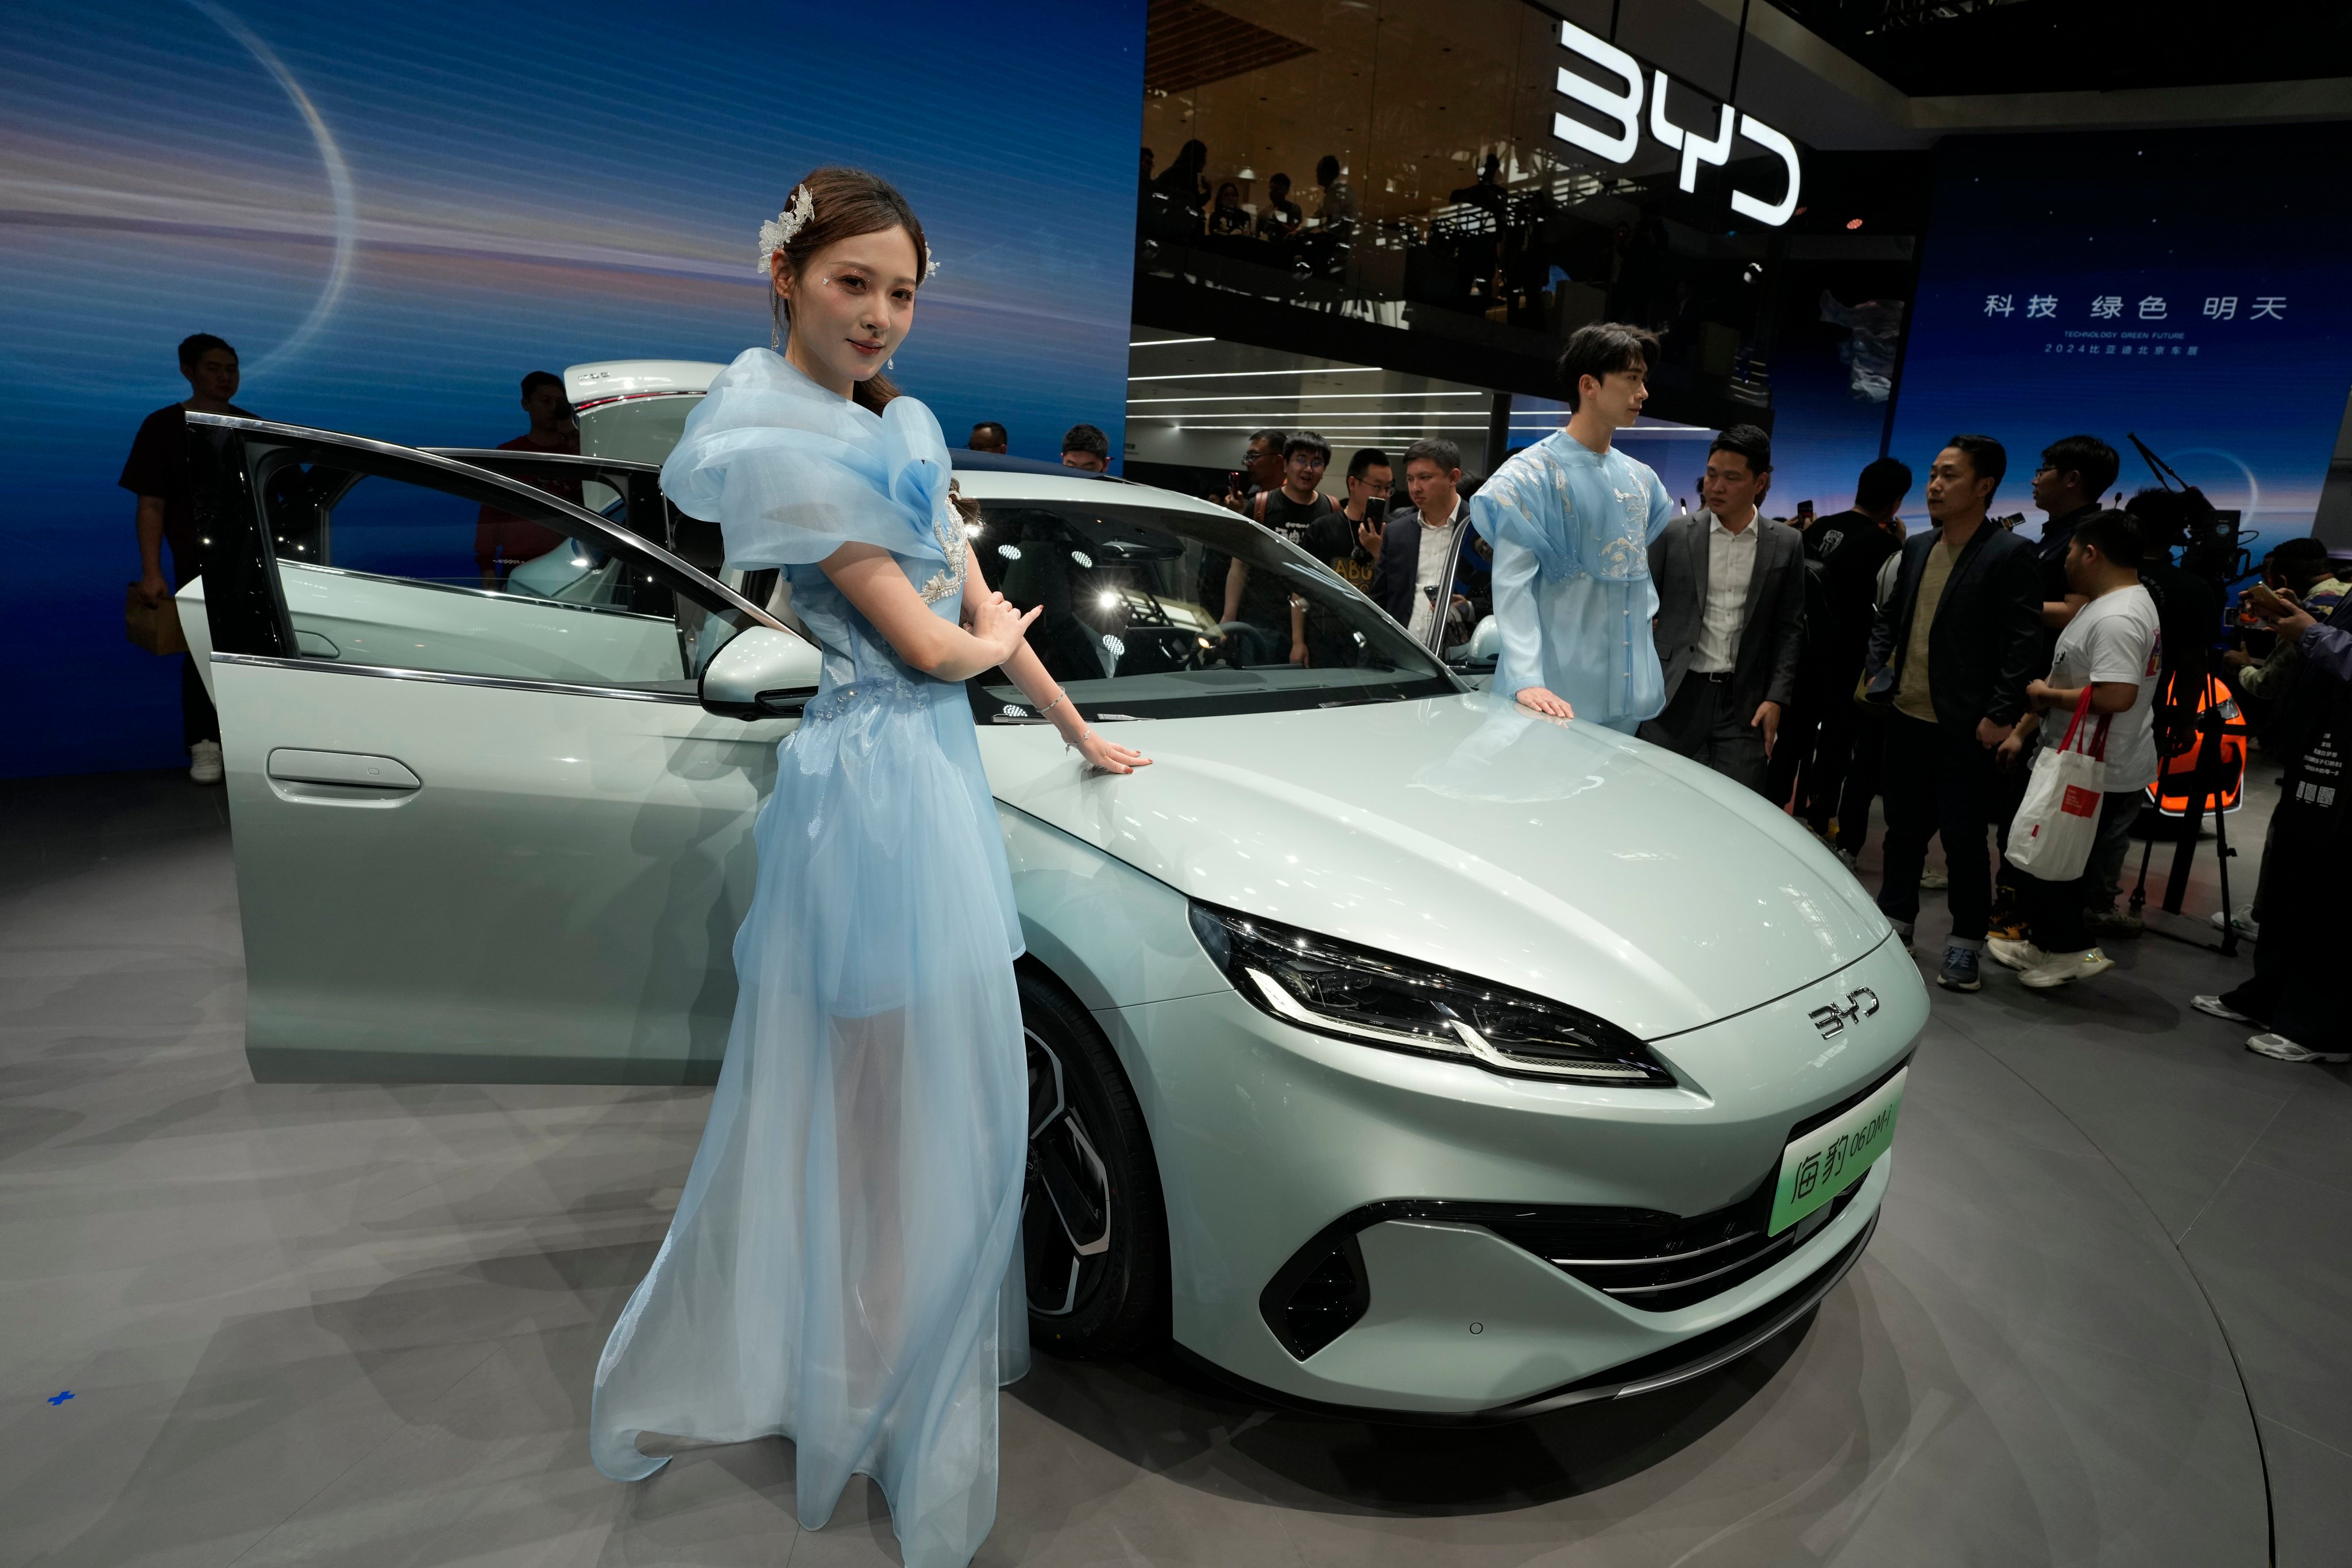 The Qin L and the Seal 06 (pictured) ‘will mount a big challenge to petrol-powered cars, becoming the new benchmarks for mid-size models,’ says BYD. Photo: AP